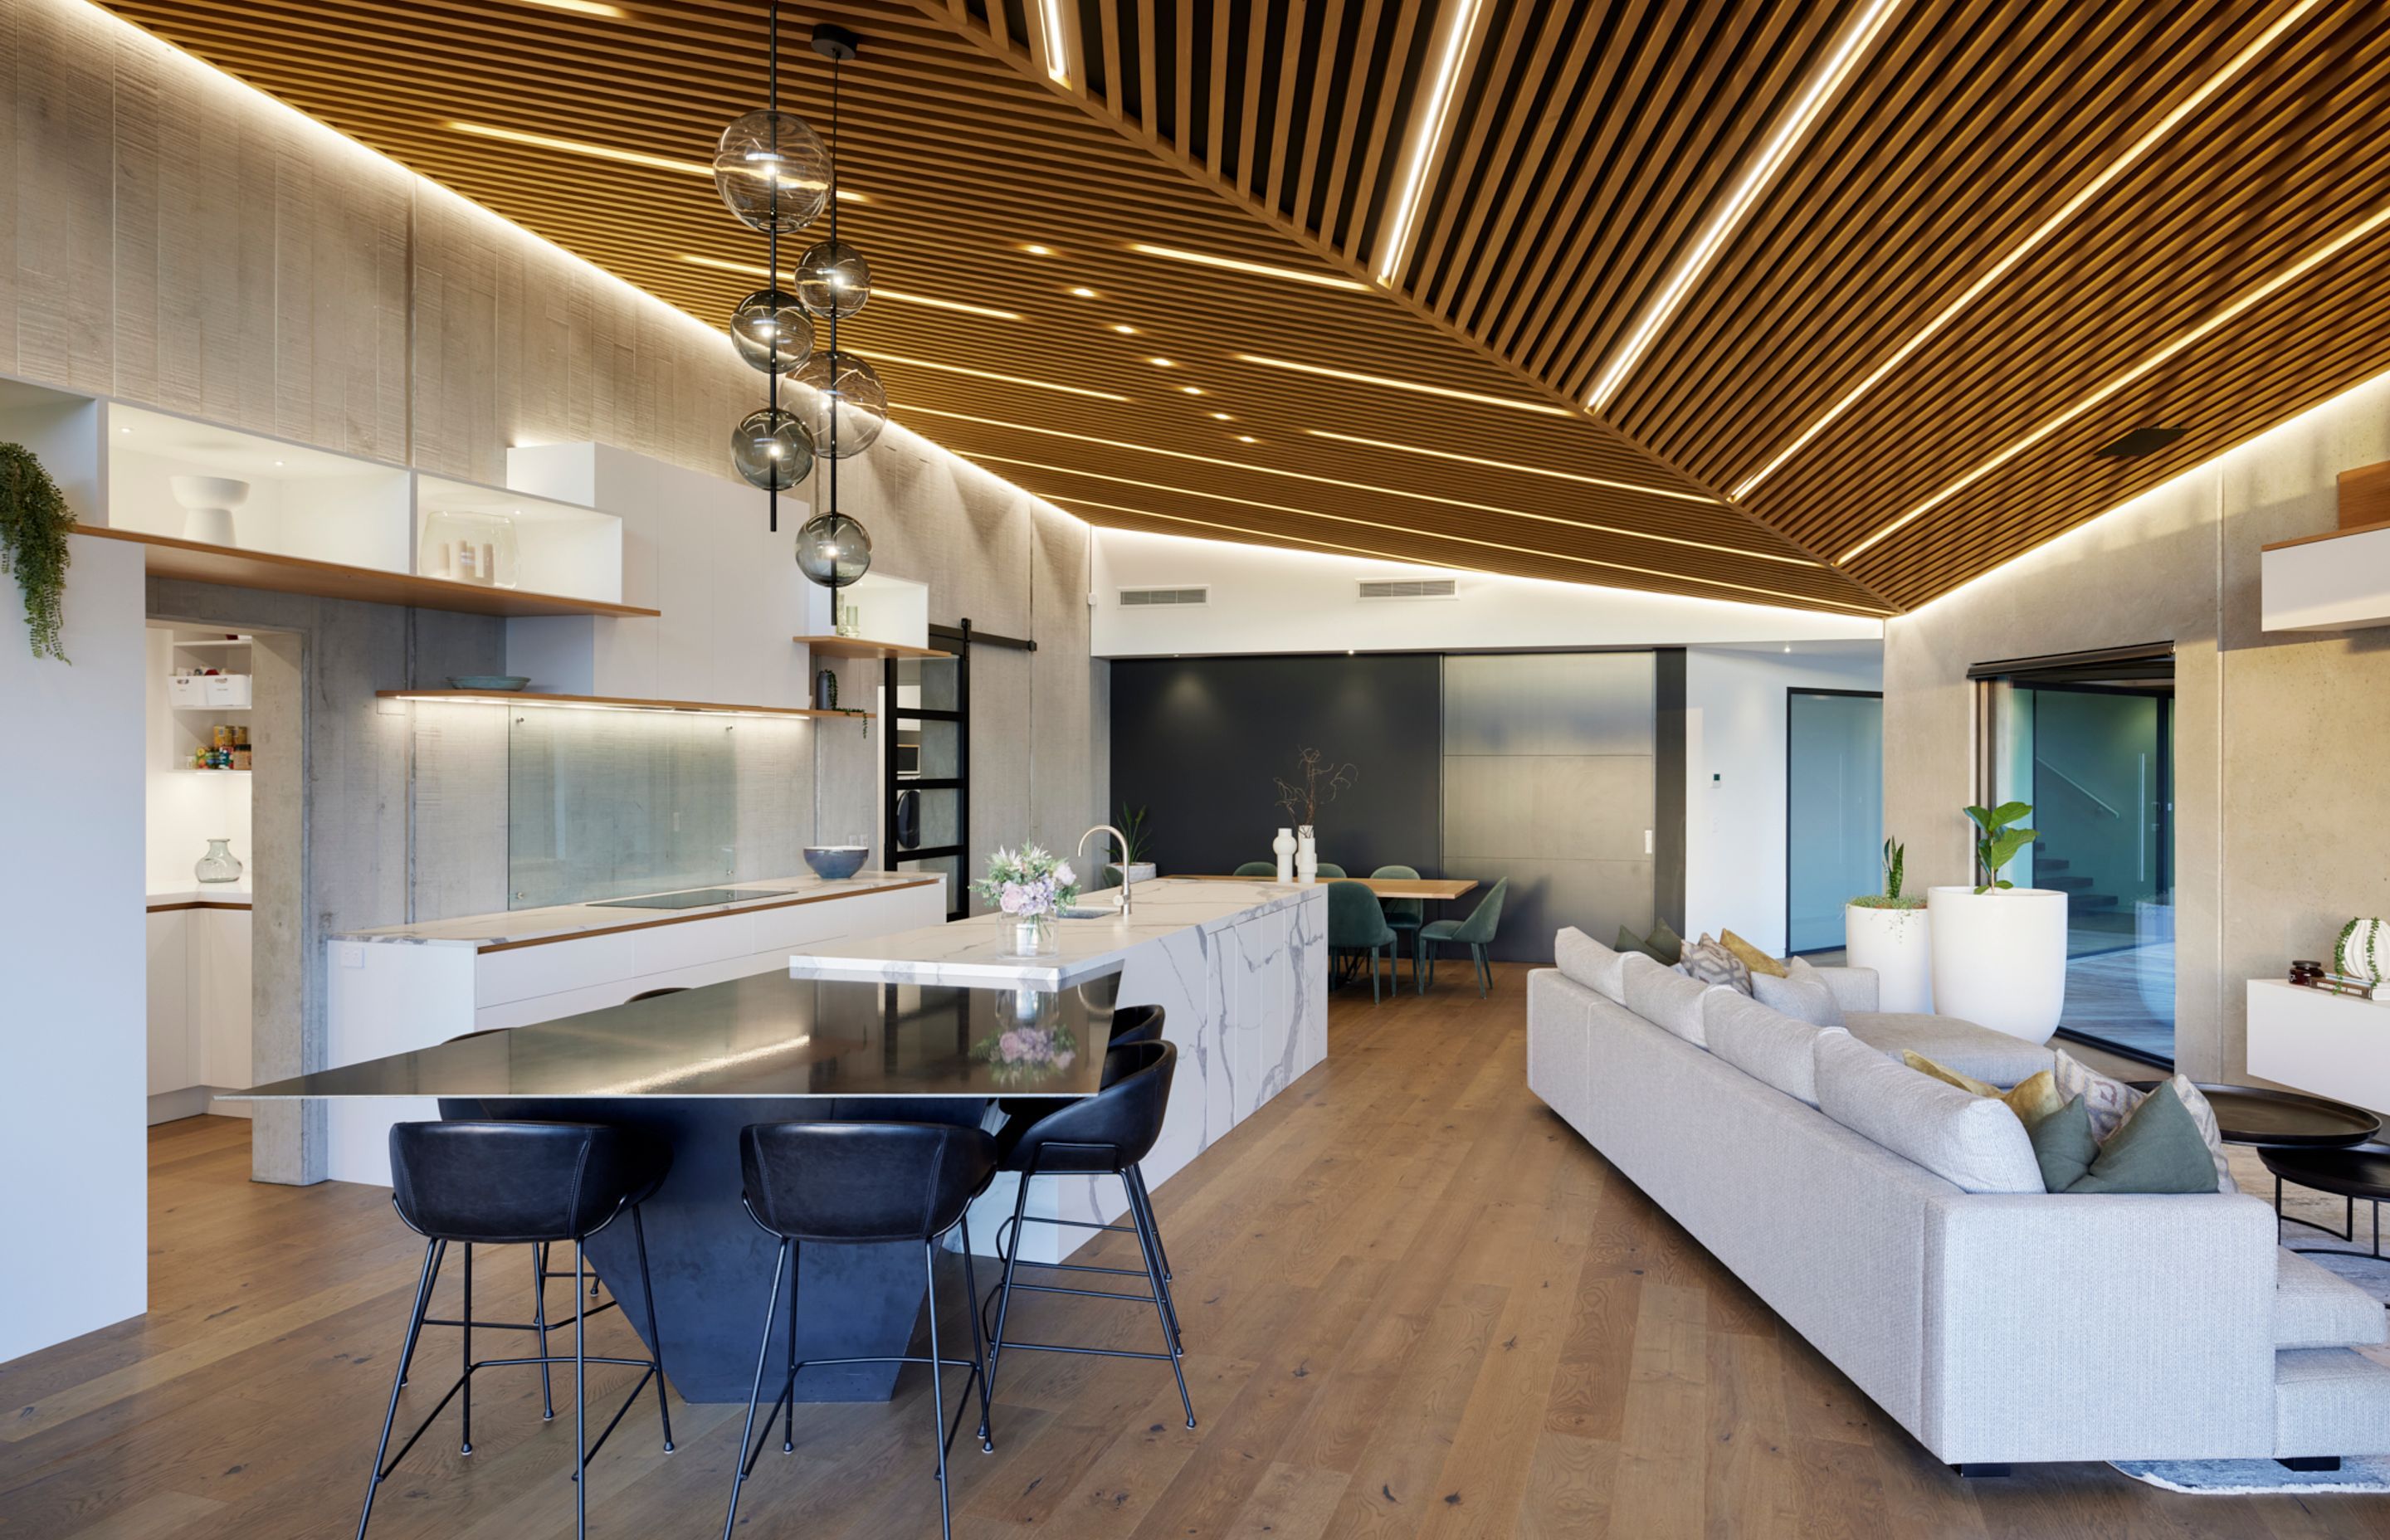 “The whole area comes alive at night as light accentuates the textures and the cedar-slatted ceiling is stunning with the in-laid linear lights – it’s fantastic at night,” says Lee.